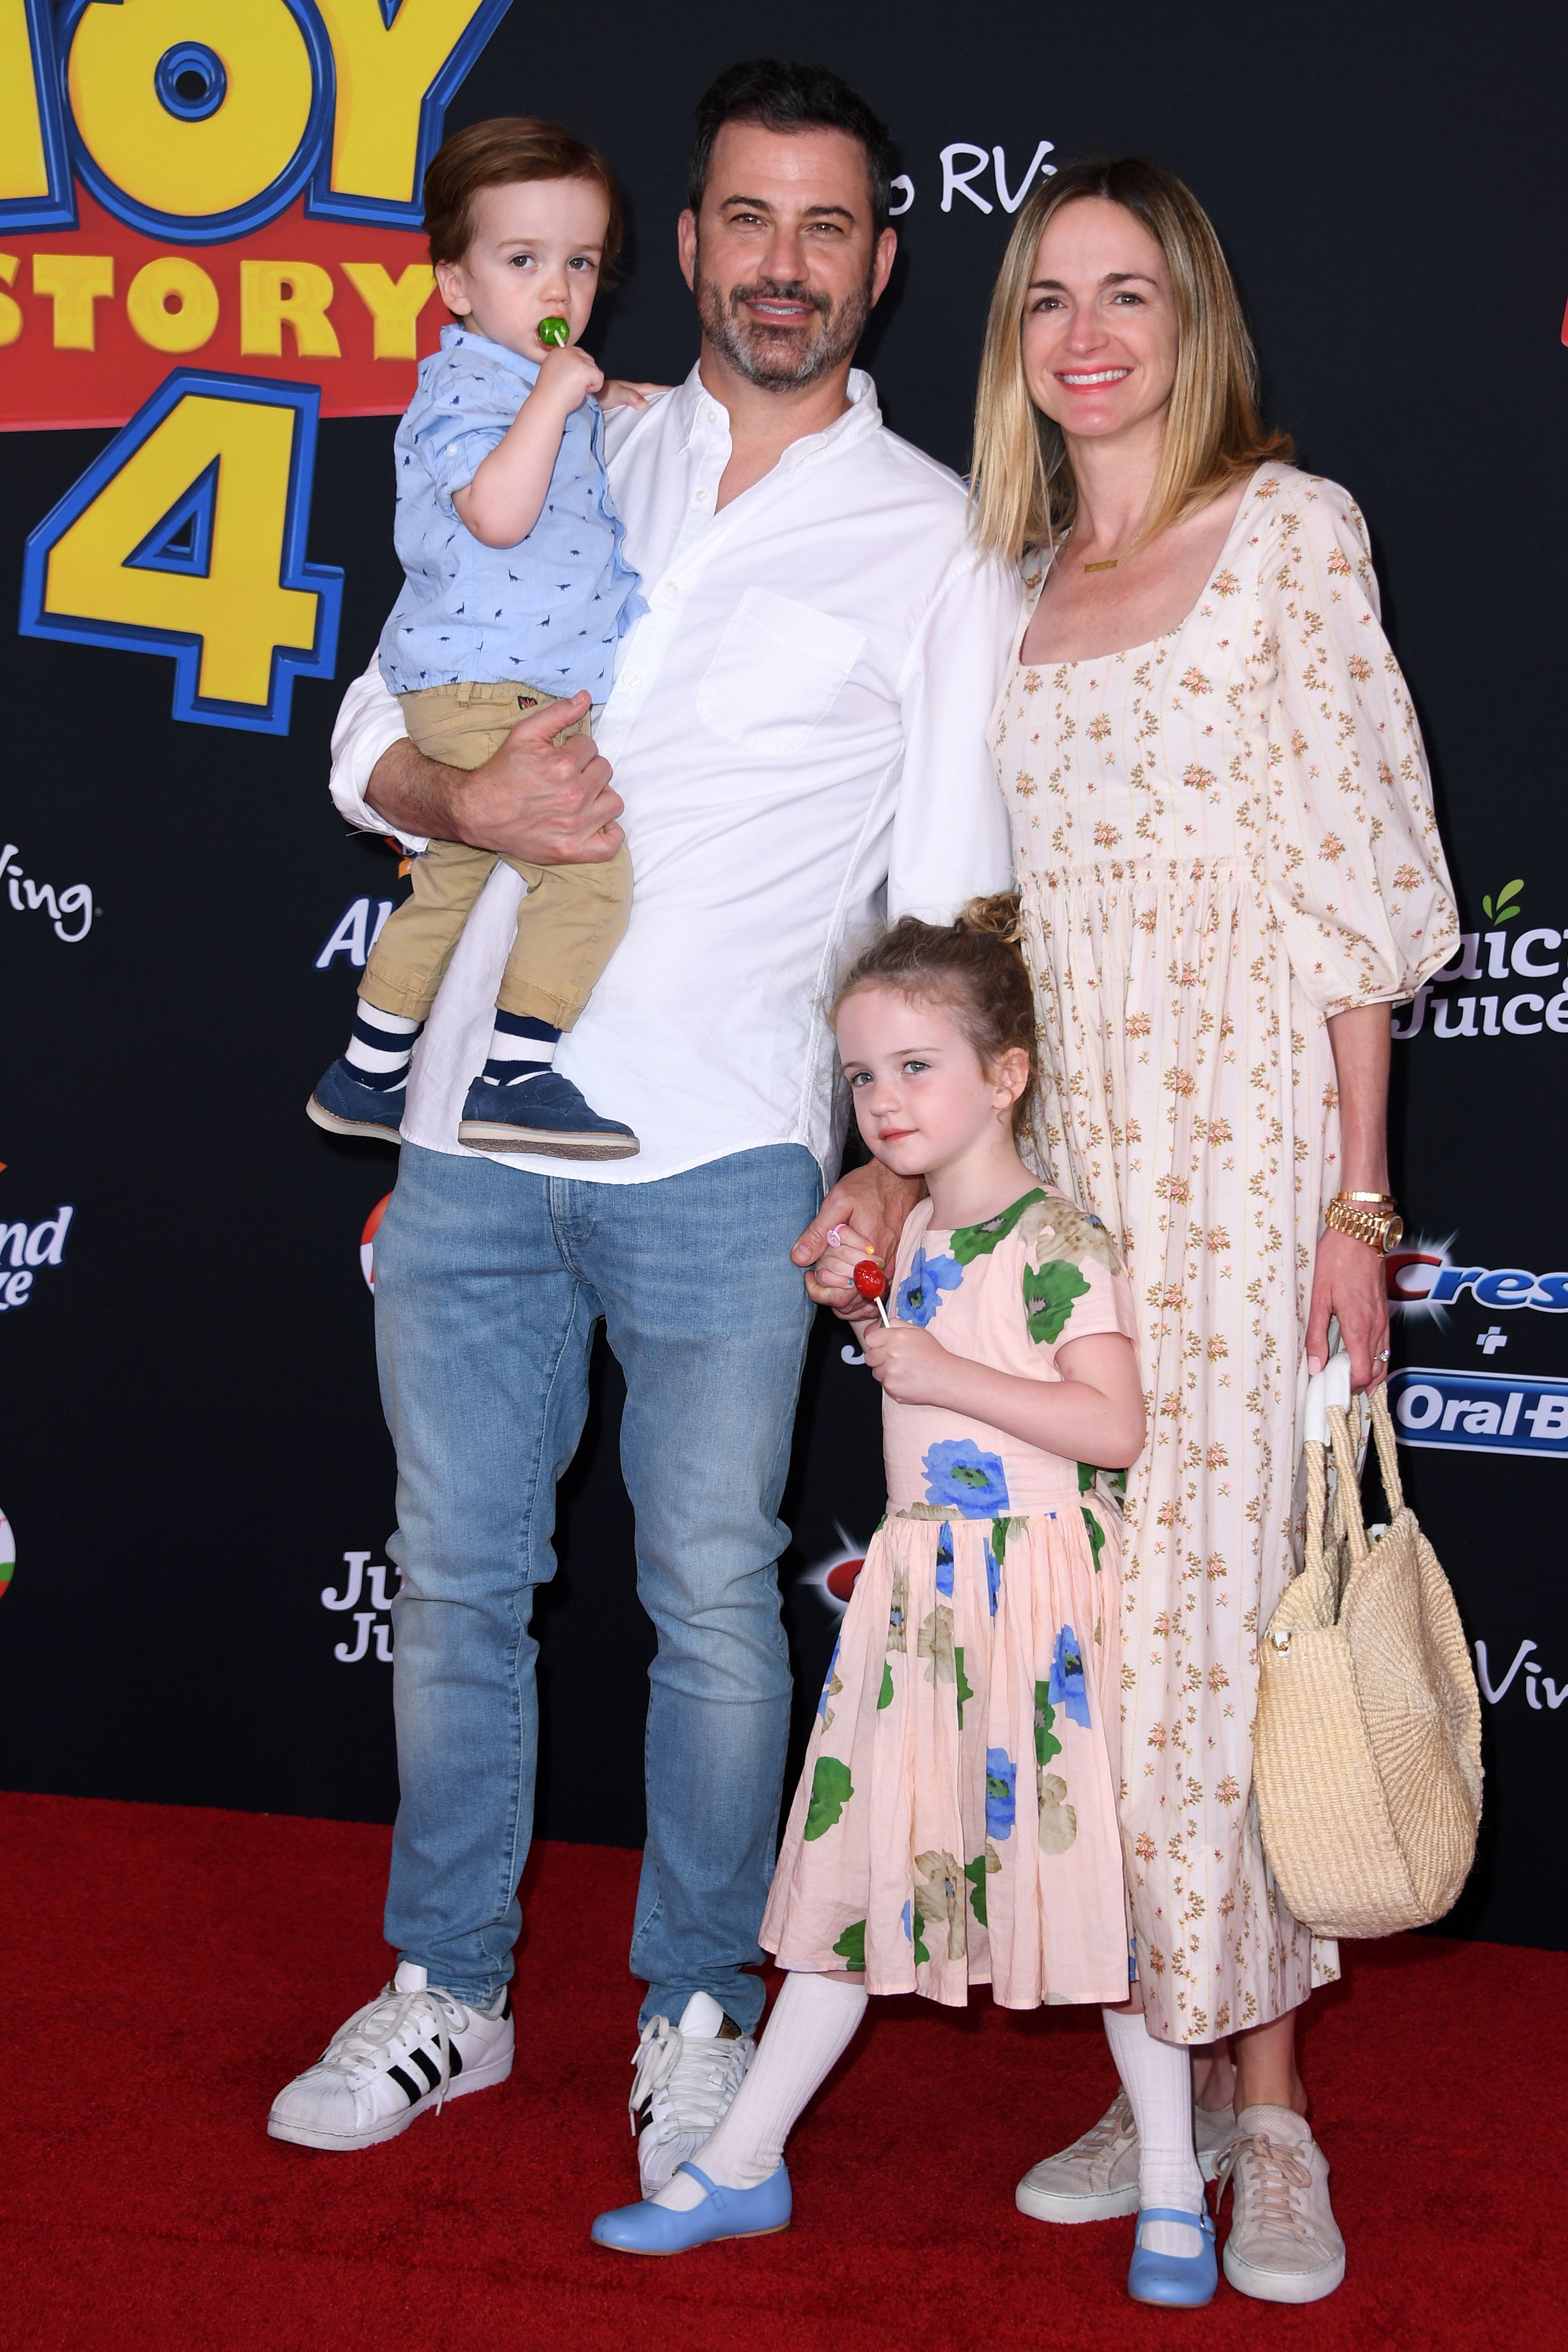 Jimmy Kimmel, wife Molly McNearney, children William and Jane arrive for the world premiere of "Toy Story 4" at El Capitan theatre in Hollywood, California on June 11, 2019.  | Source: Getty Images